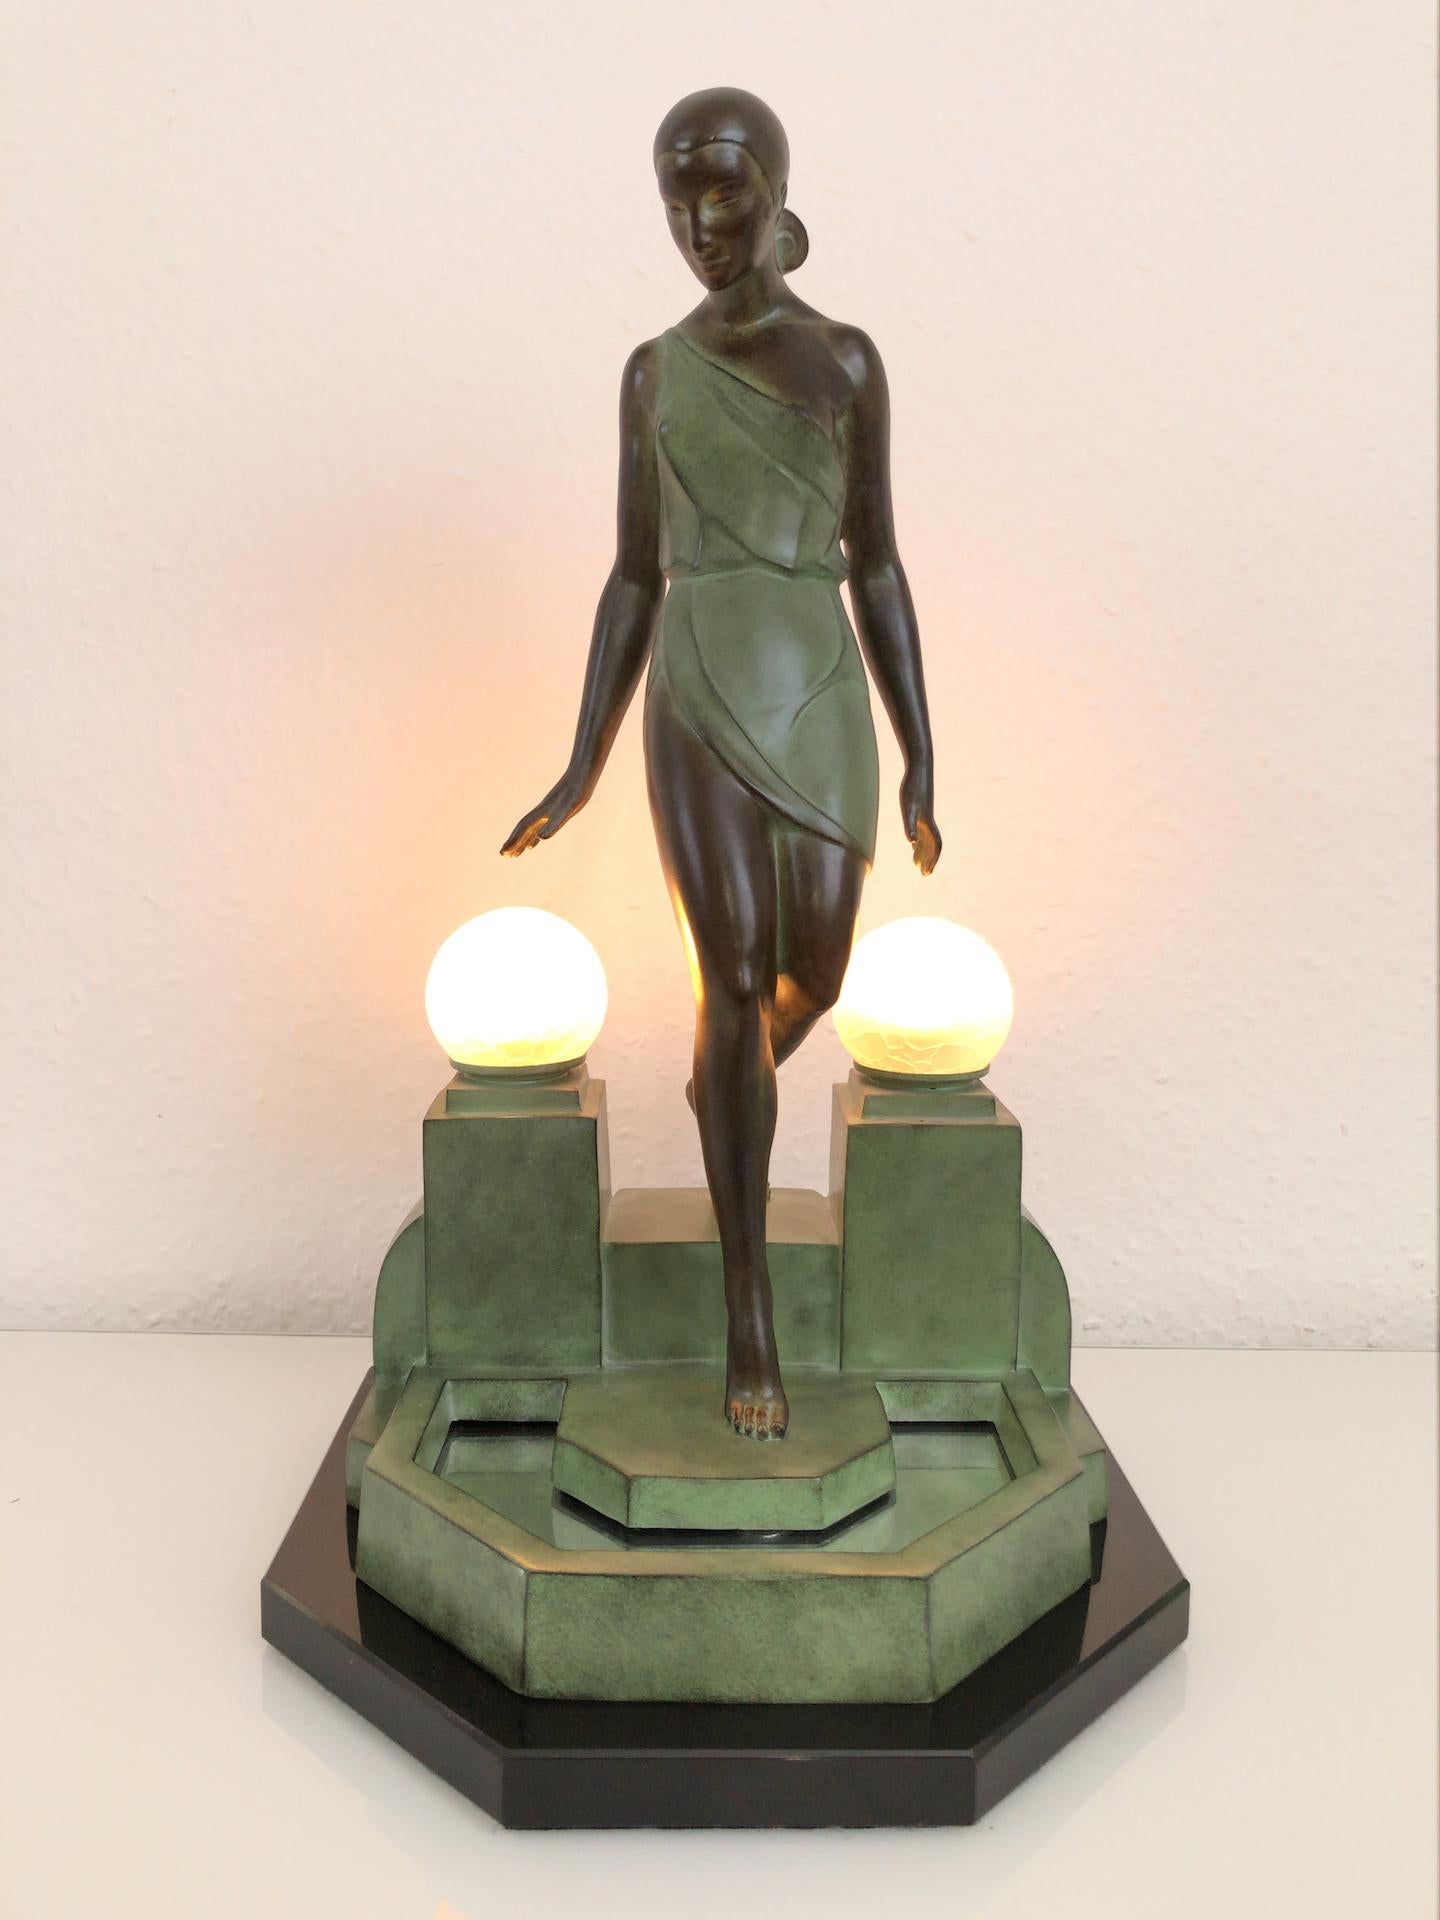 “Nausicaa”
Lady at the fountain
Designed in France during the roaring 1920s by “Fayral”, which is one of the pseudonymes from “Pierre Le Faguays” (1892-1962)
Original “Max Le Verrier”
Art Deco style, France

Lighted sculpture made in “Régule”